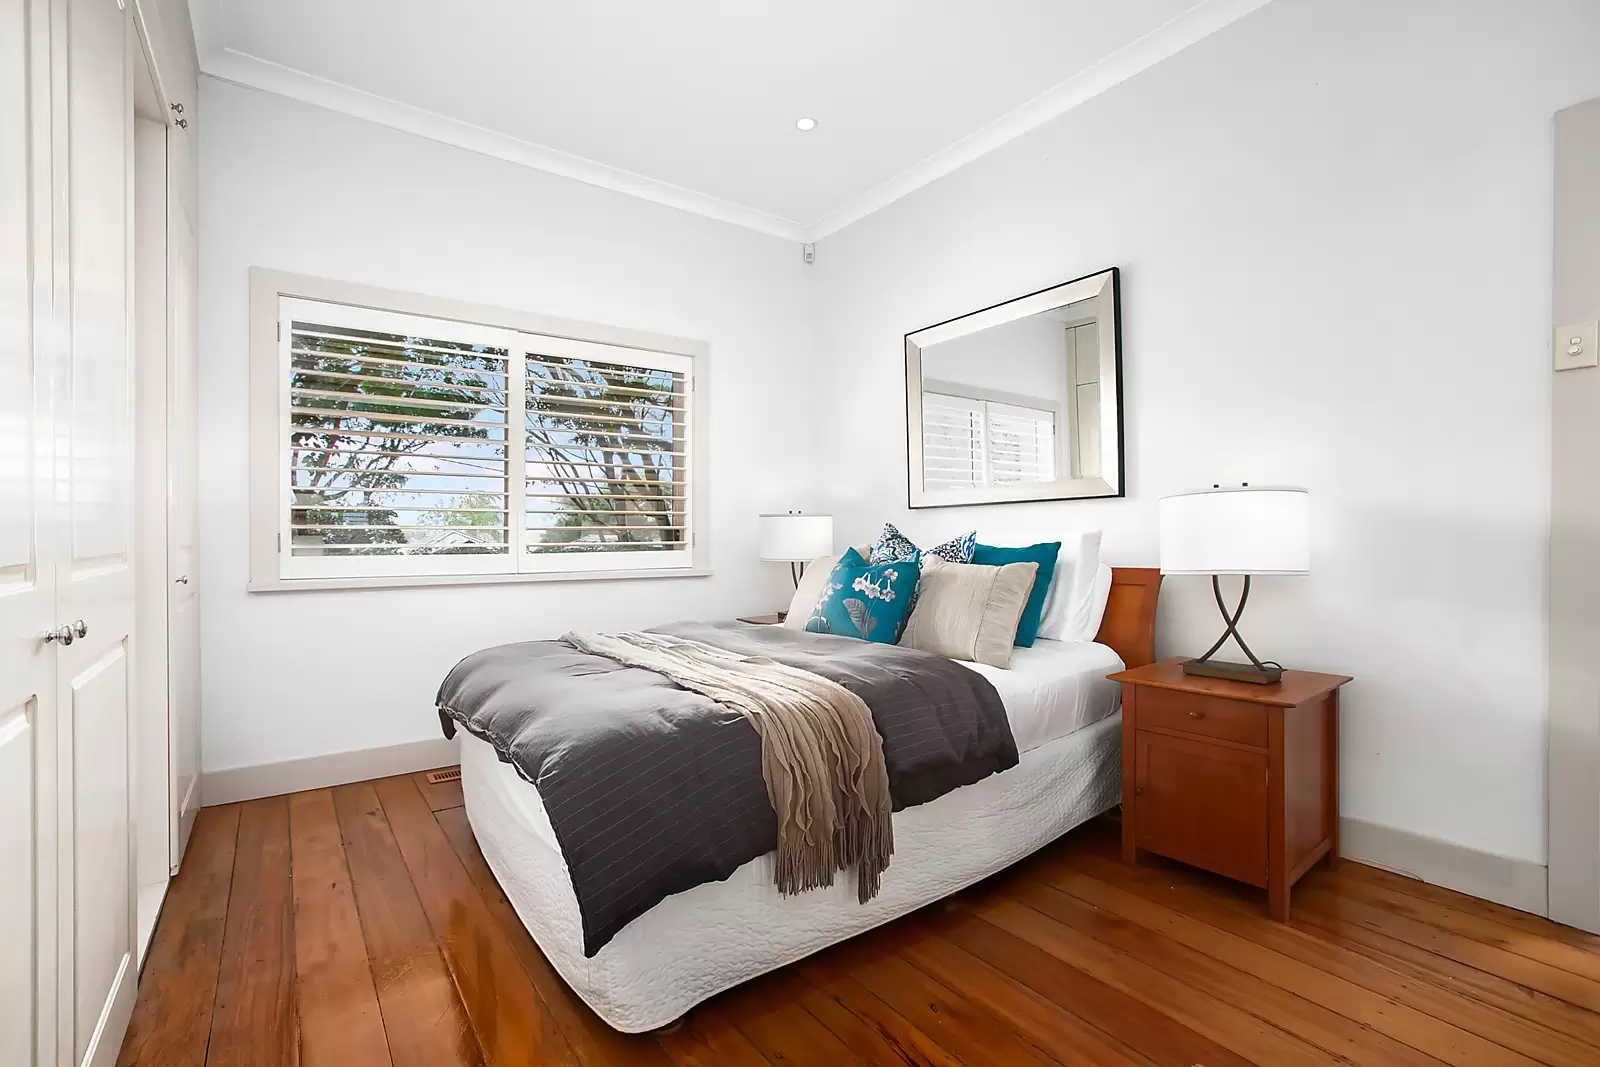 Photo #7: 12 Woodland Street, Coogee - Sold by Sydney Sotheby's International Realty